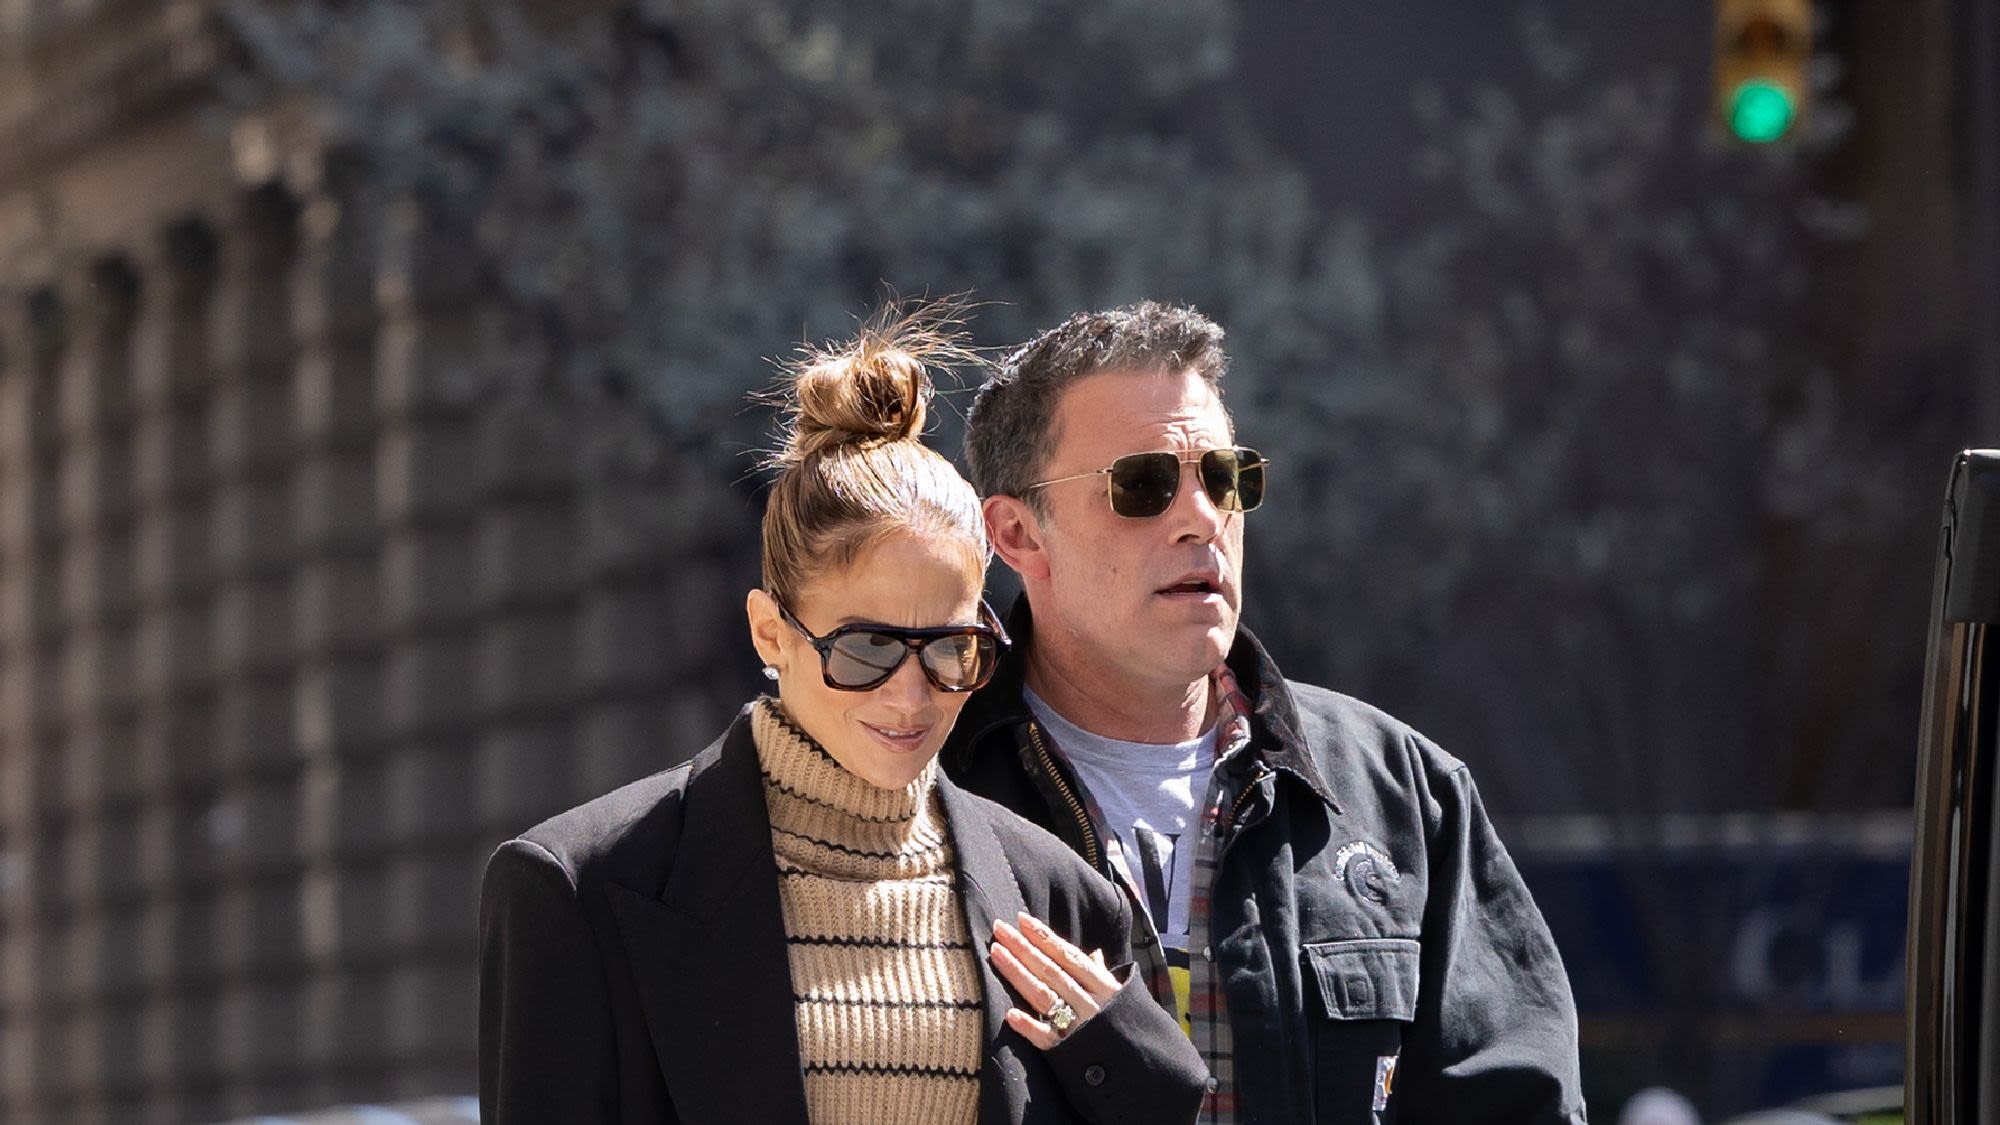 A Source Is Out Here Claiming Ben Affleck Wants to Divorce J.Lo on Grounds of "Temporary Insanity"